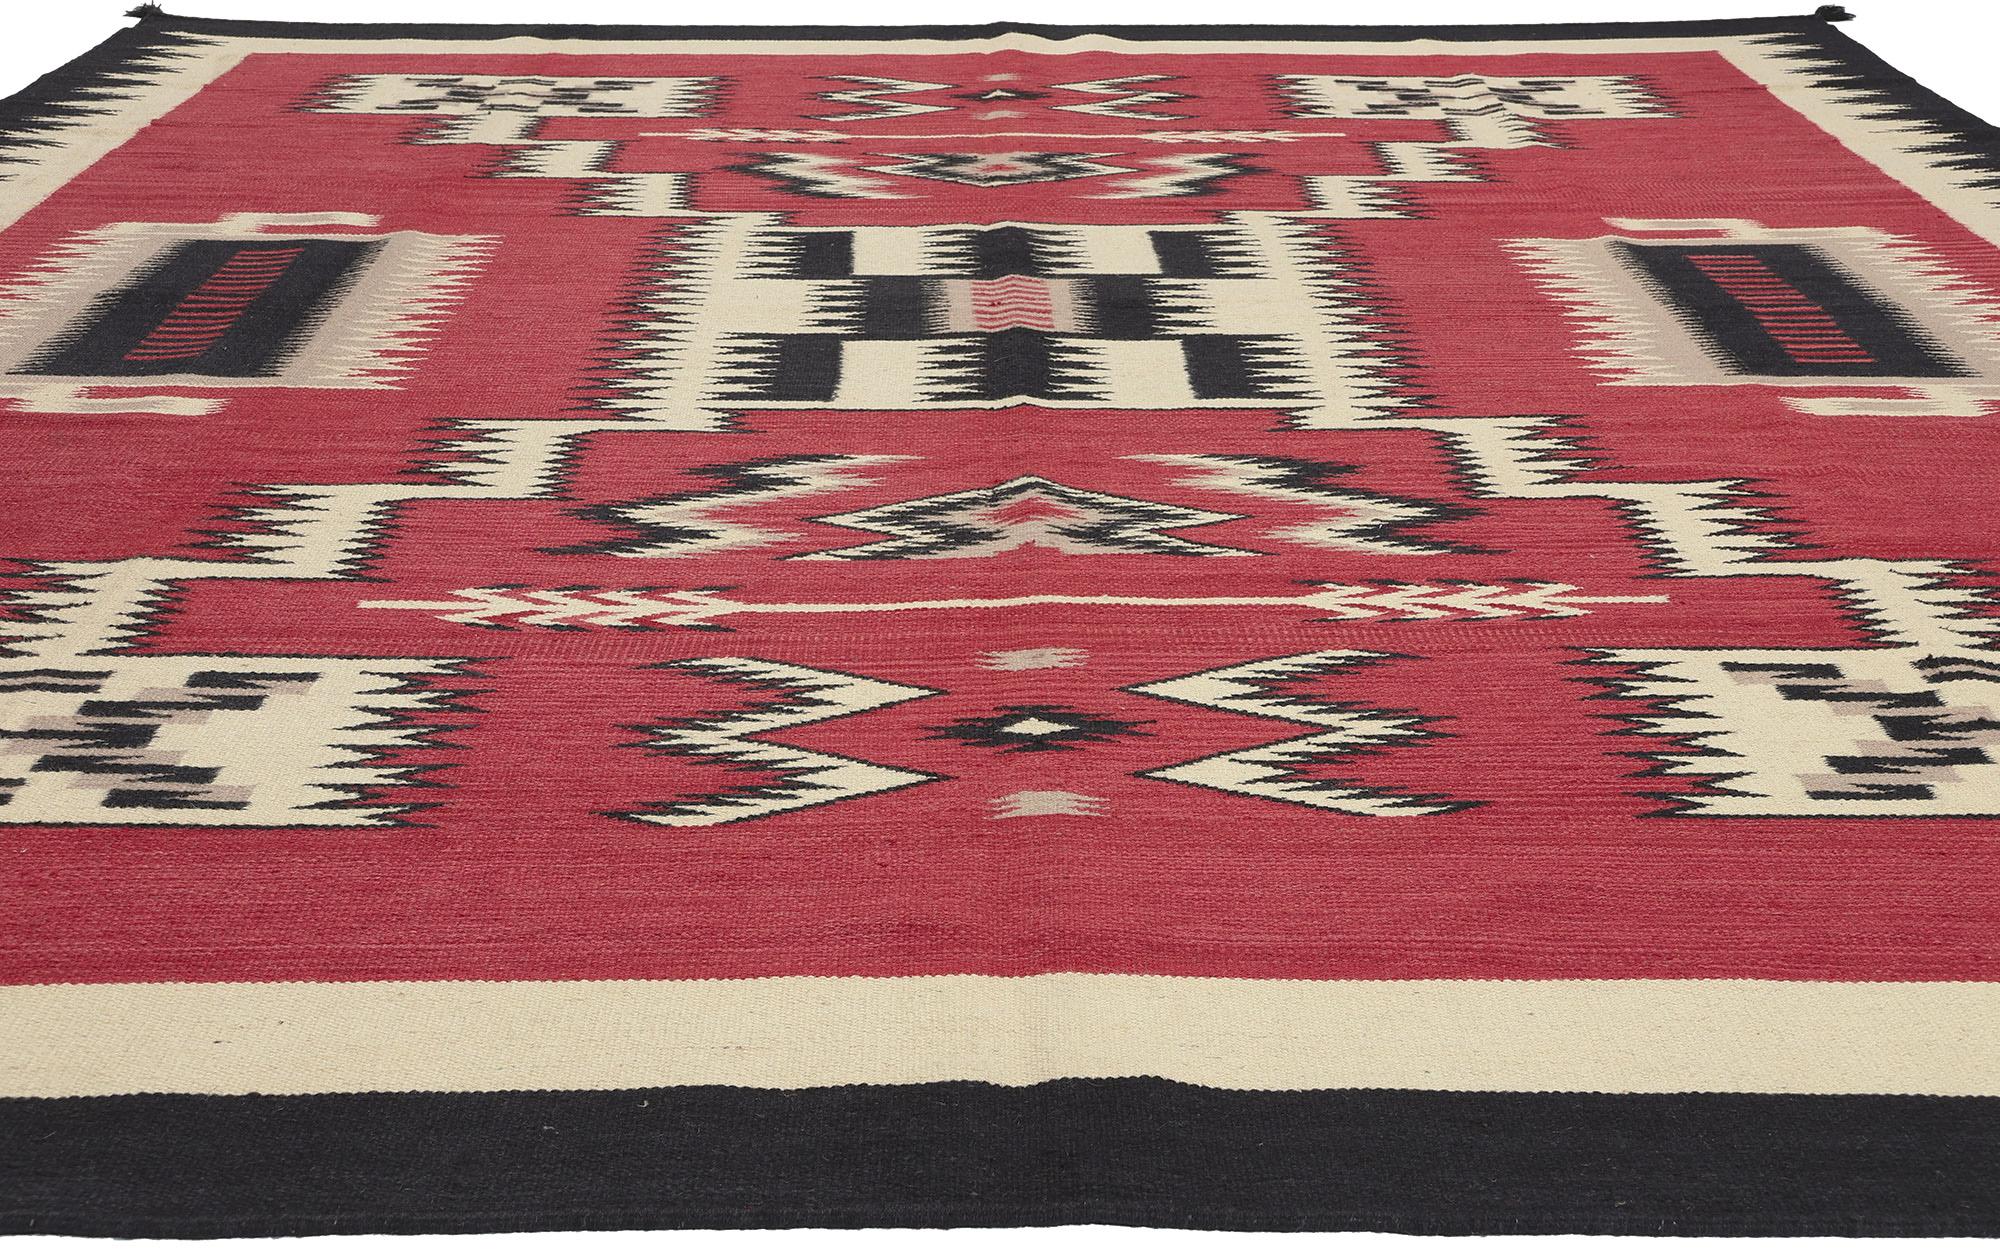 South Asian Contemporary Santa Fe Southwest Modern Red Navajo-Style Rug with Storm Pattern For Sale